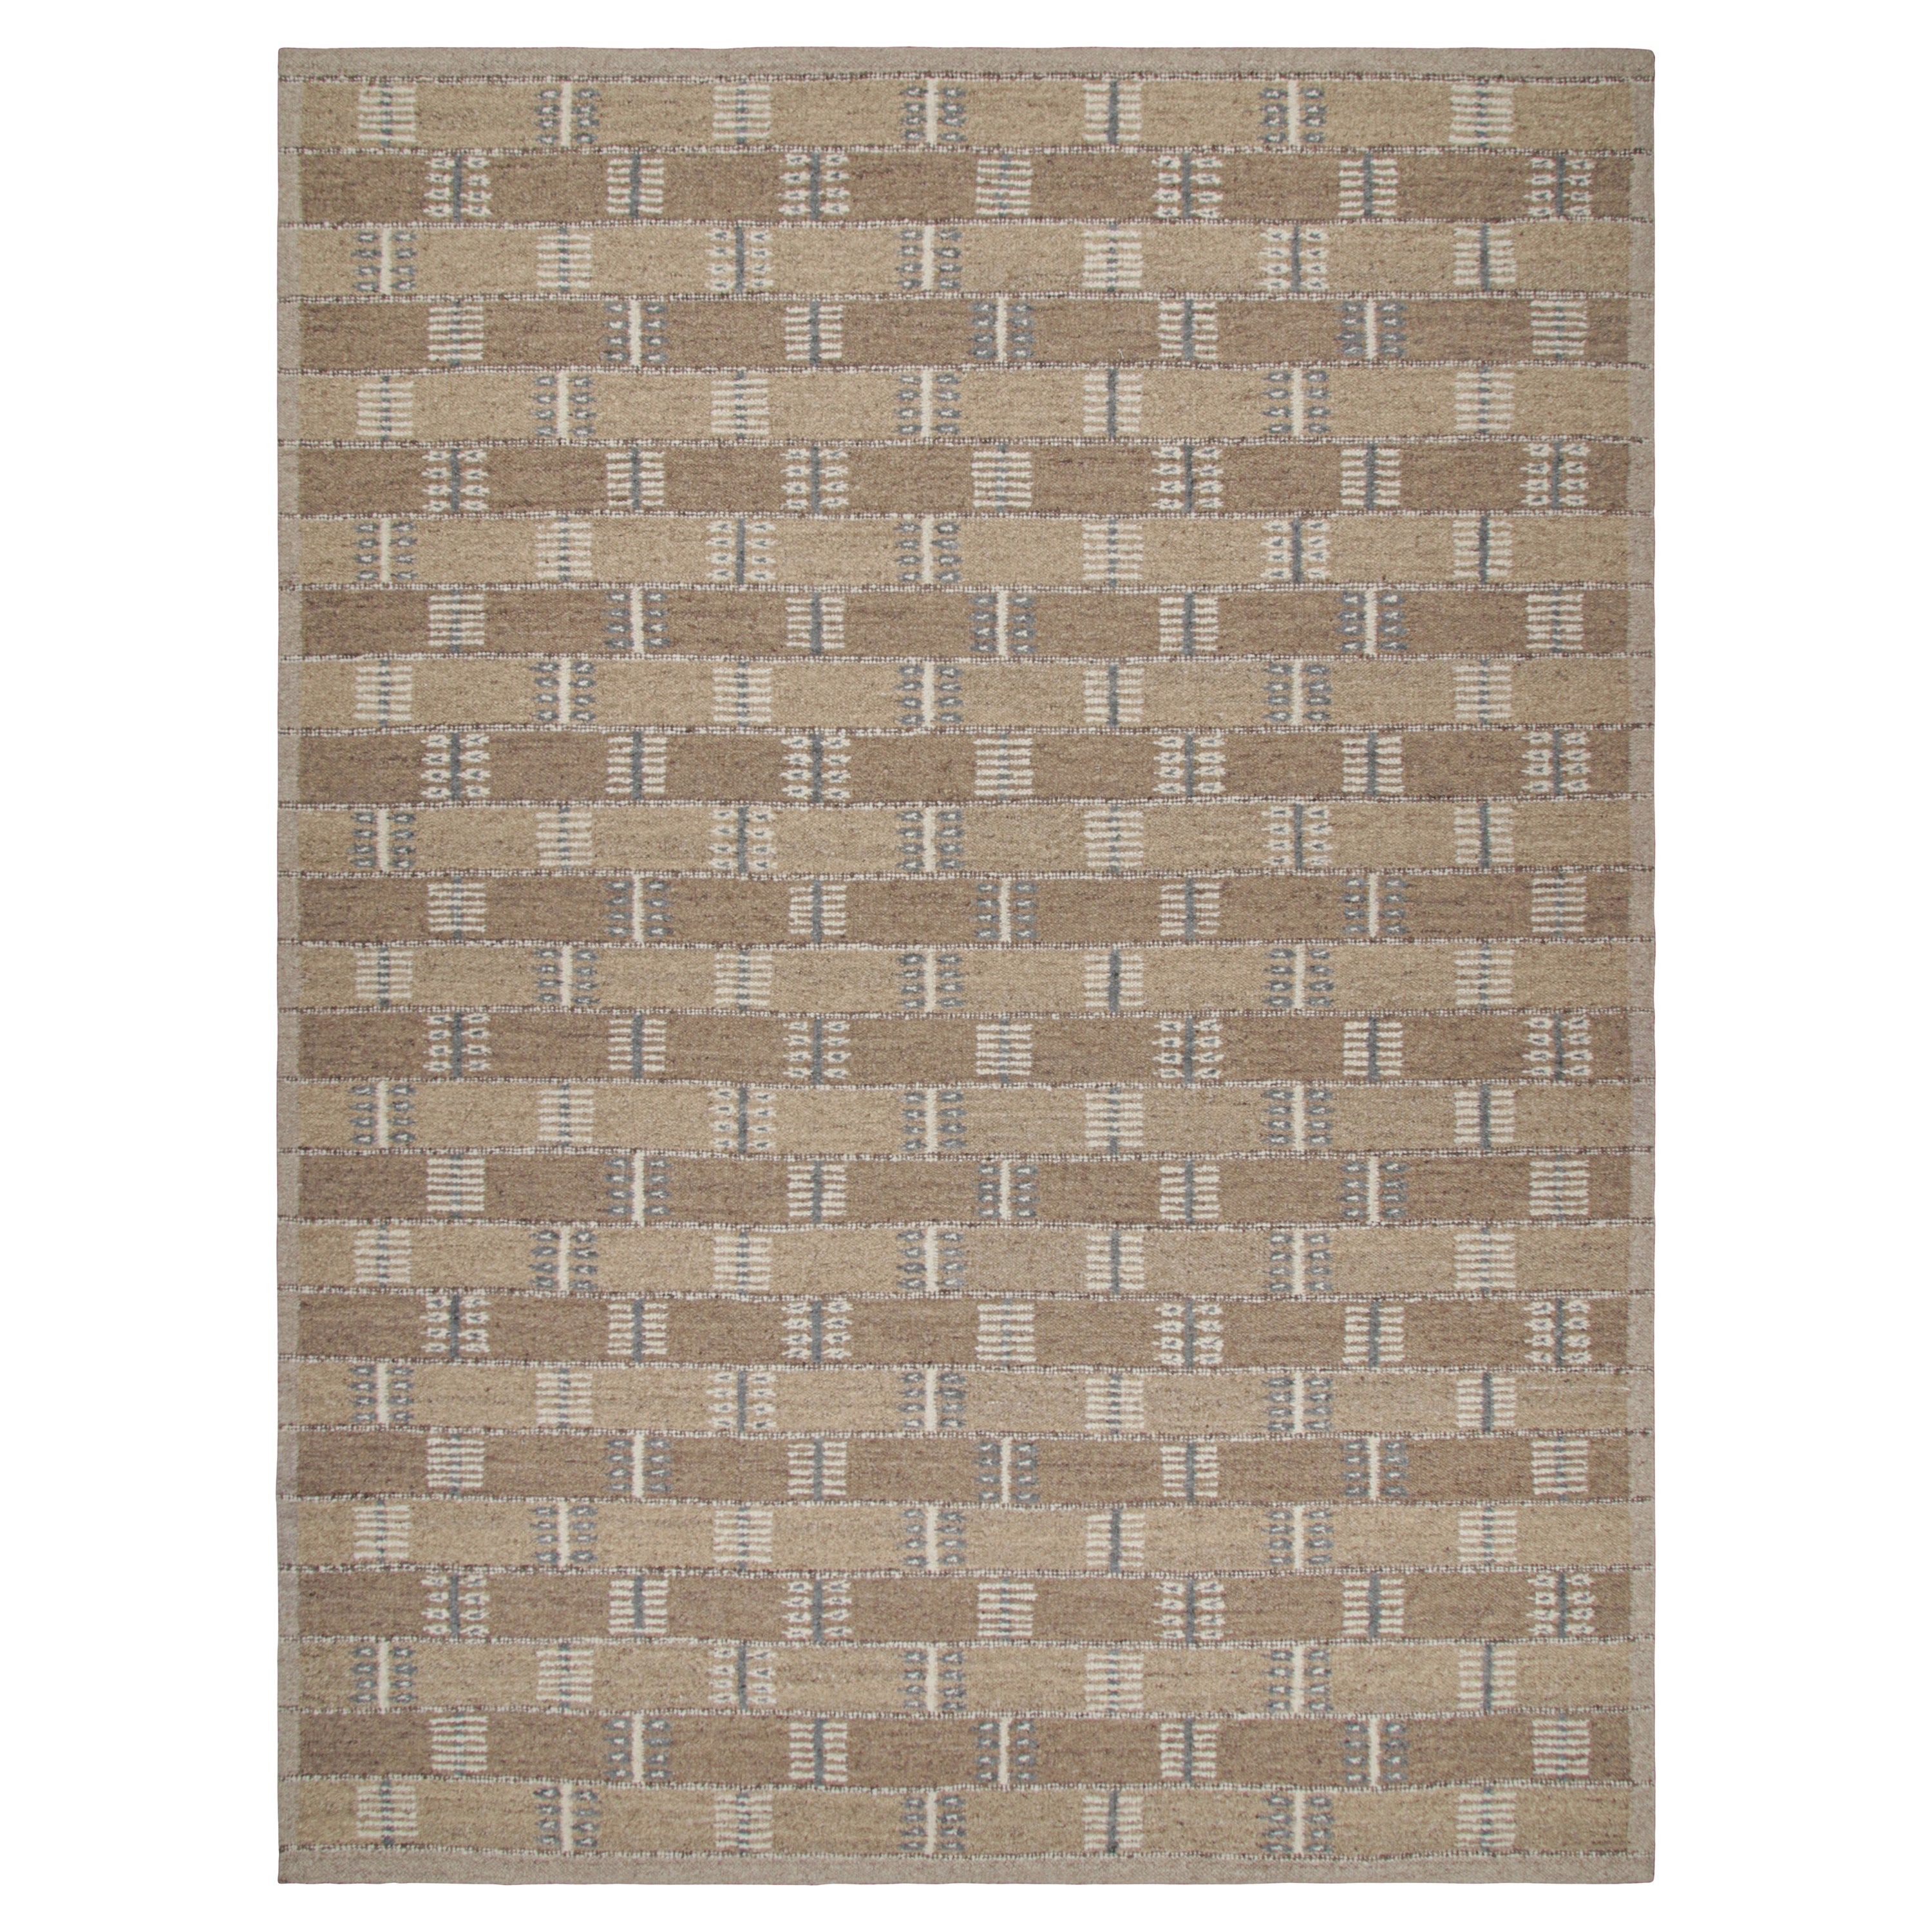 Rug & Kilim’s Scandinavian Style Rug with Beige-Brown and Gray Geometric Pattern